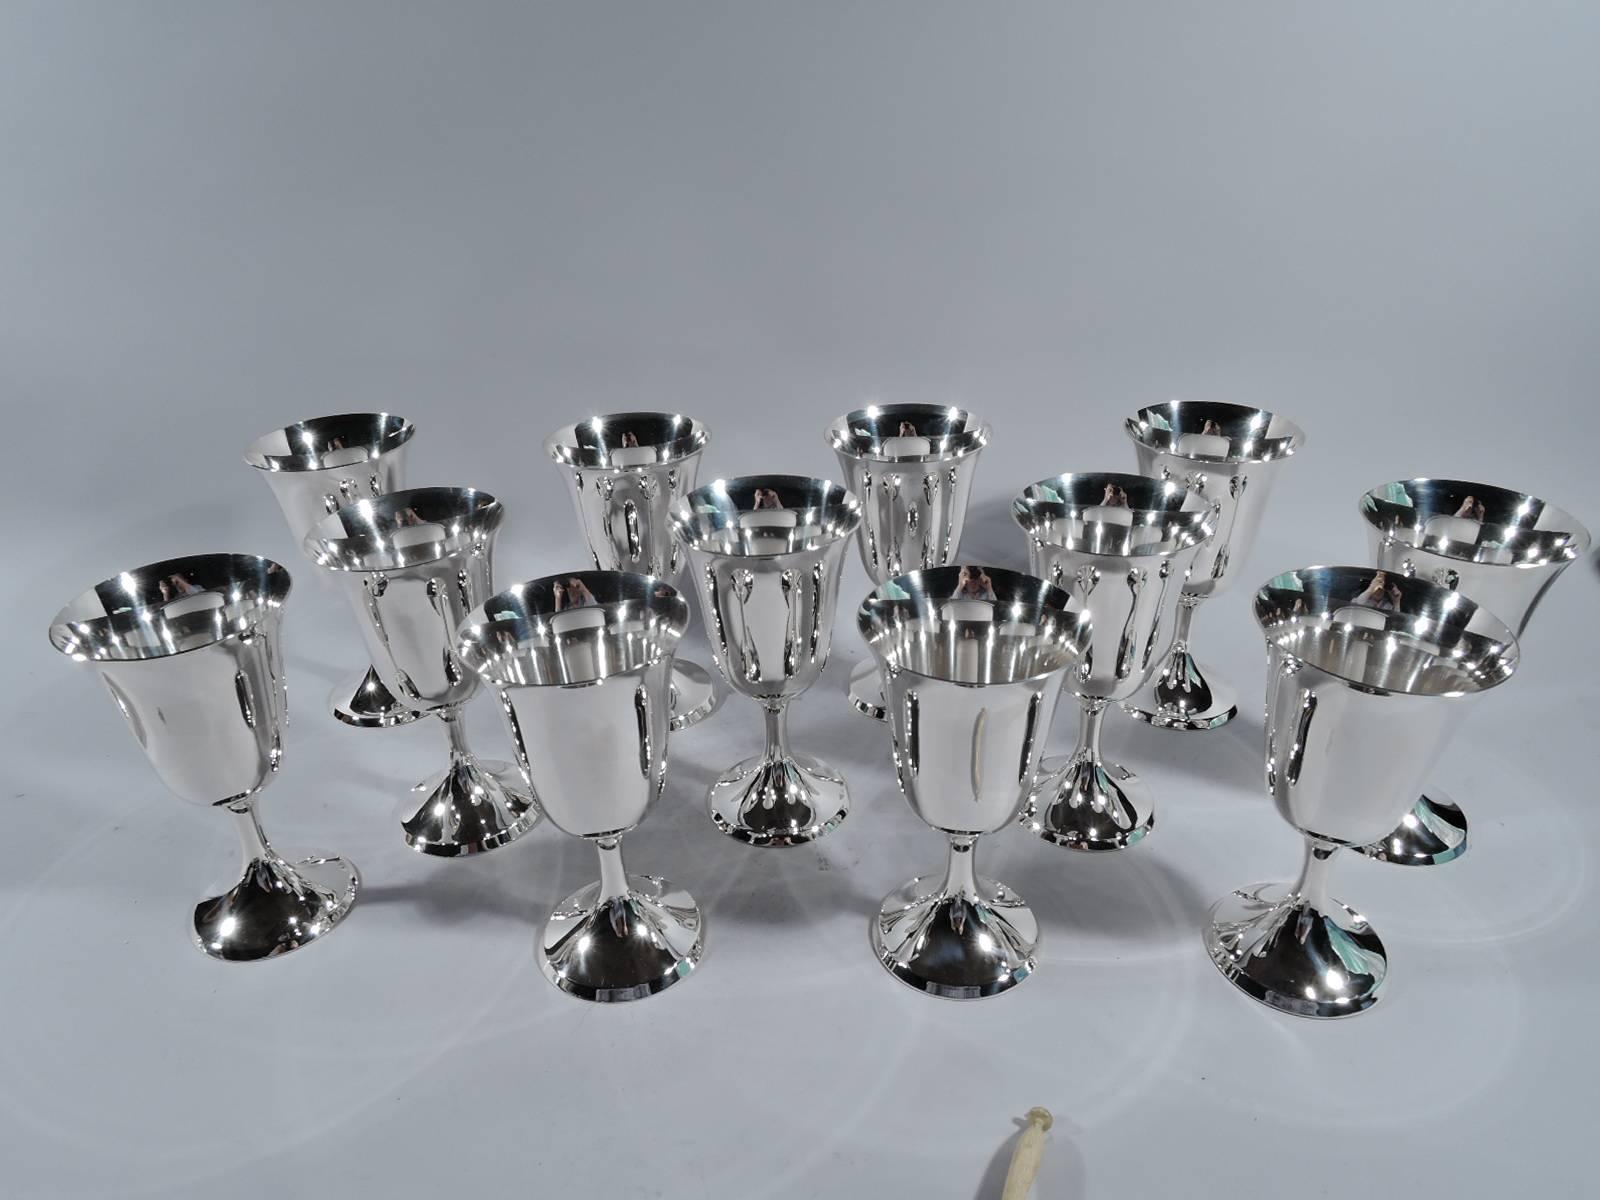 Twelve sterling silver goblets. Made by Stieff in Baltimore, 1950s-1960s. Each: Tall and tapering bowl with flared rim, stem, and raised foot. A great all-purpose set for formal dinners and last-minute brunches. Hallmark includes no. 0801 and date